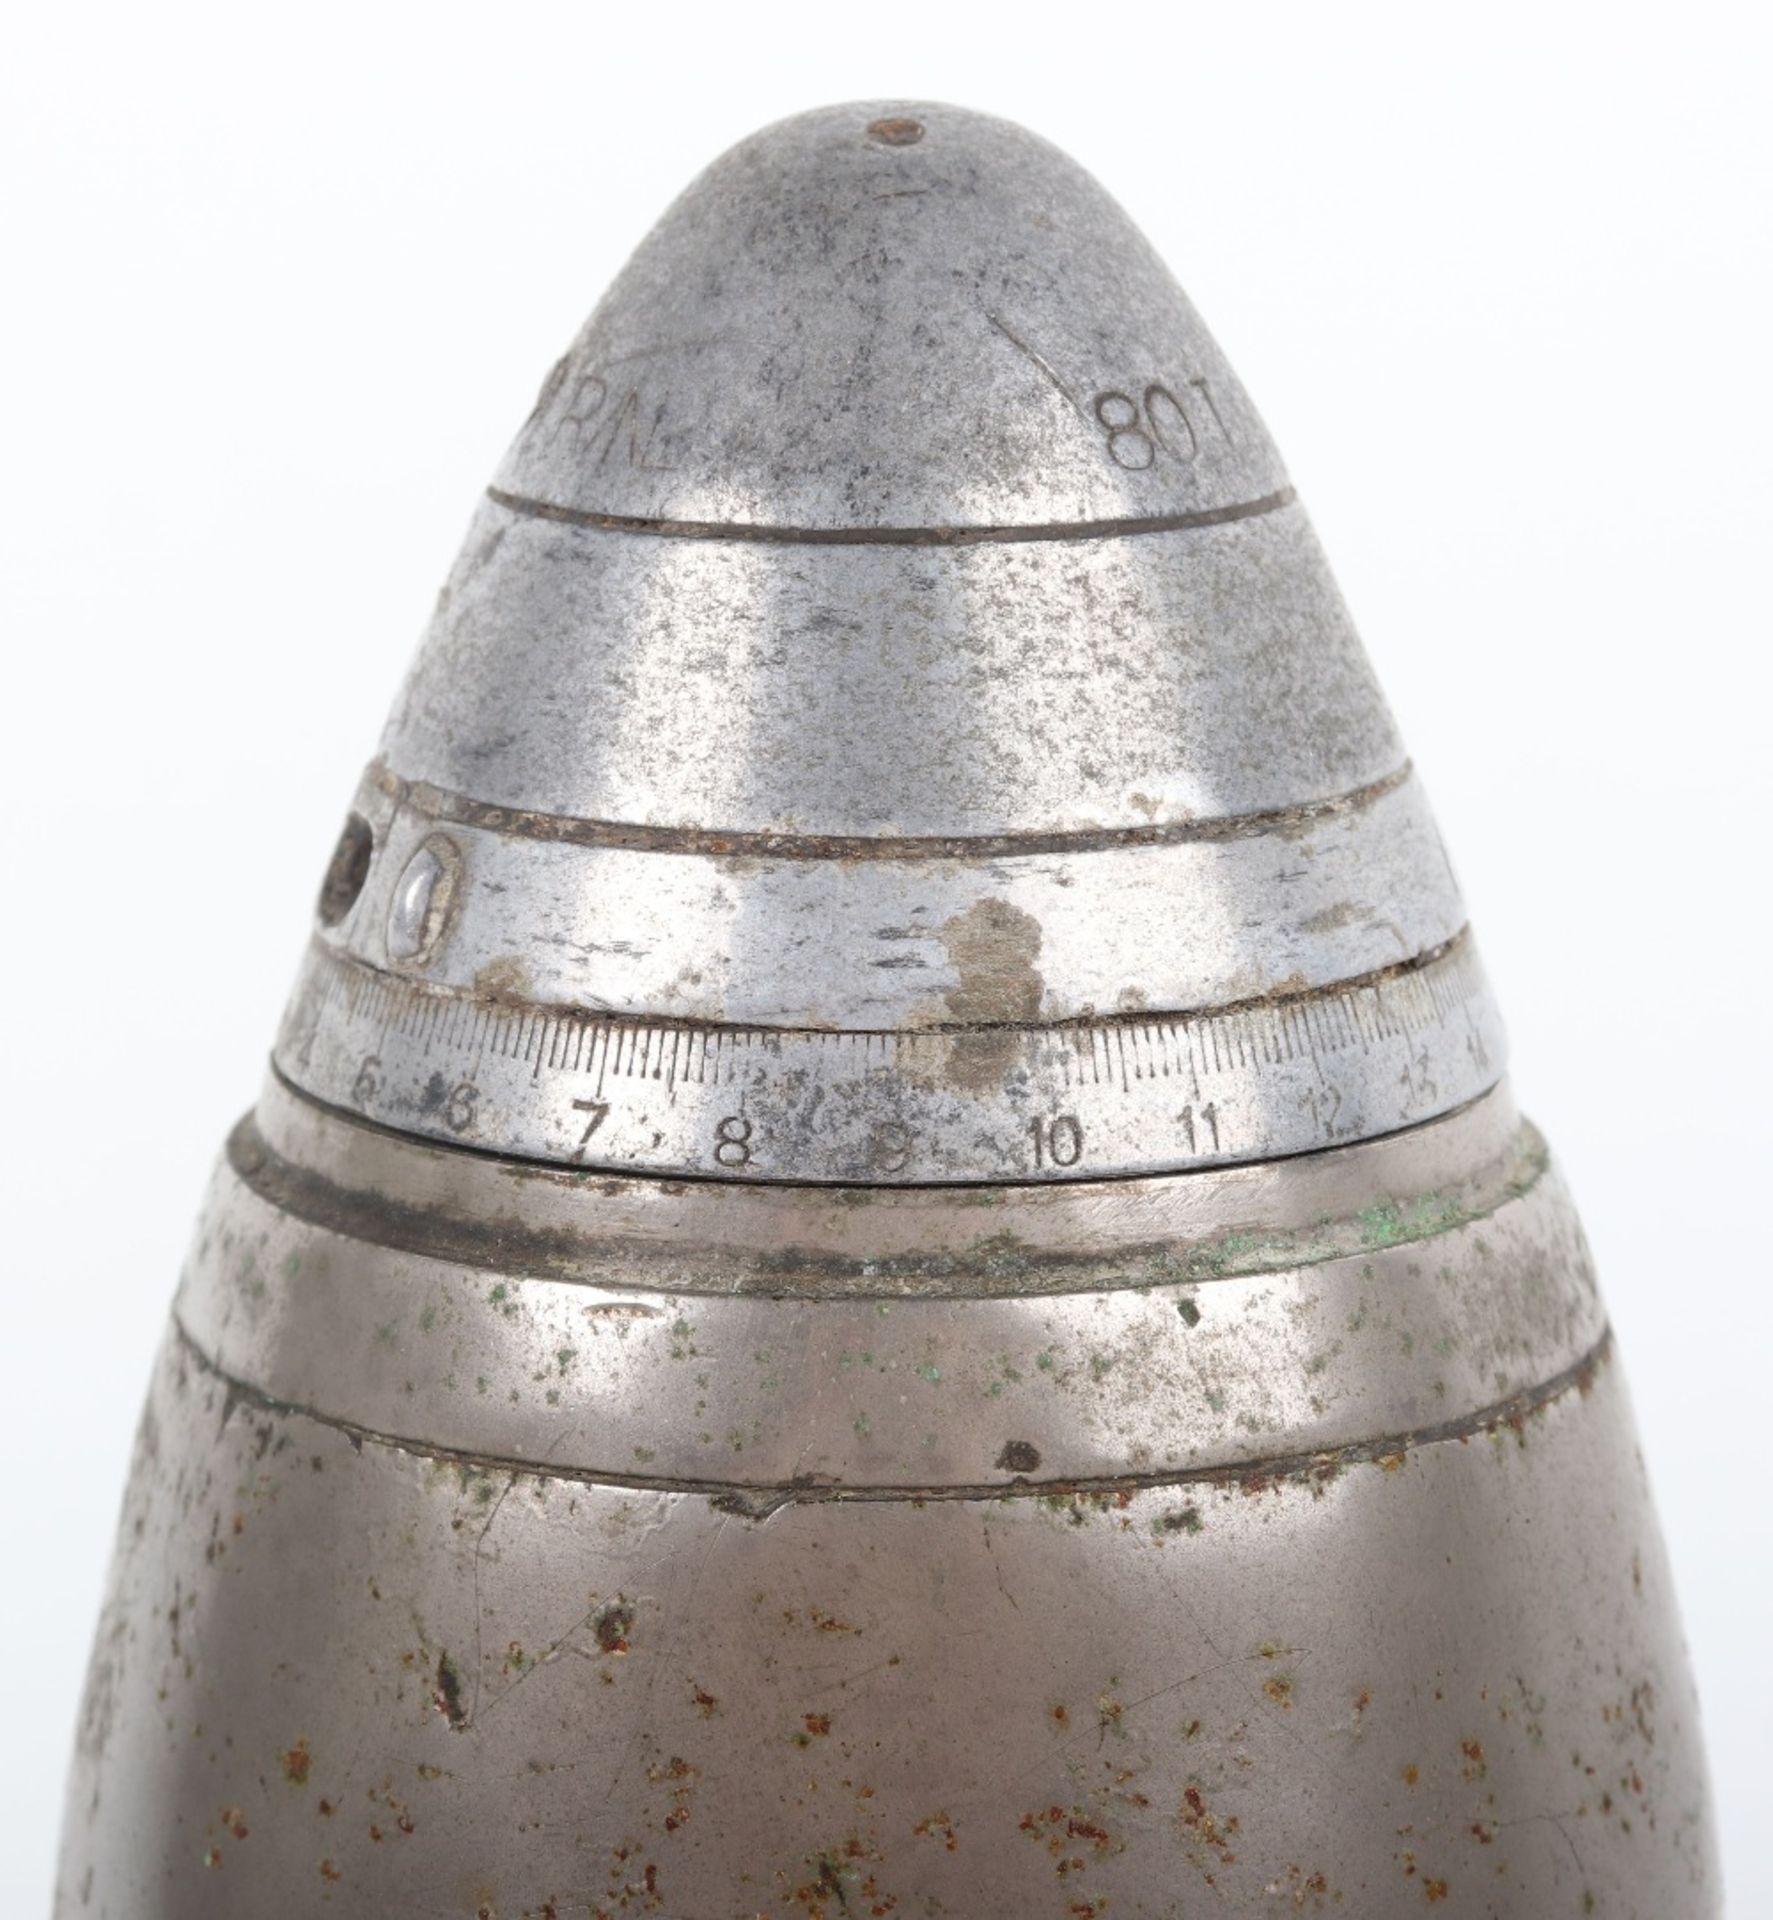 Inert British WW1 18pdr Projectile - Image 6 of 7